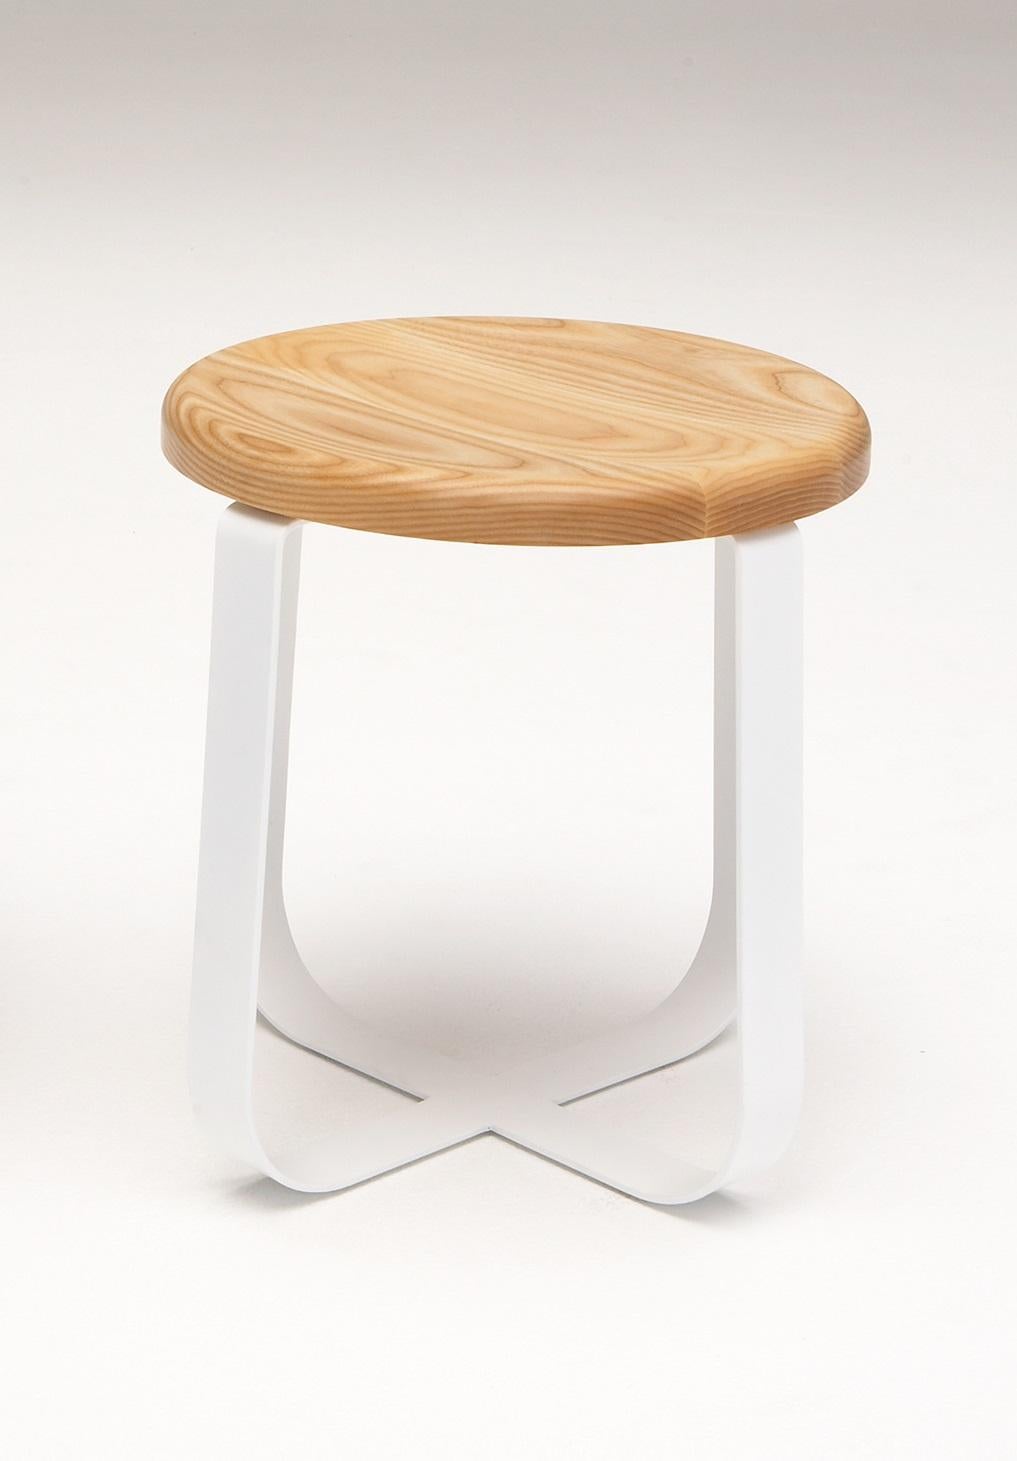 Primi Low Stool by Phase Design
Dimensions: Ø 48.3 x H 44.5 cm. 
Materials: Powder-coated steel and white ash.

Solid steel flat bar available in a flat black or white powder coat finish with CNC cut walnut, white ash, or upholstered top. Powder